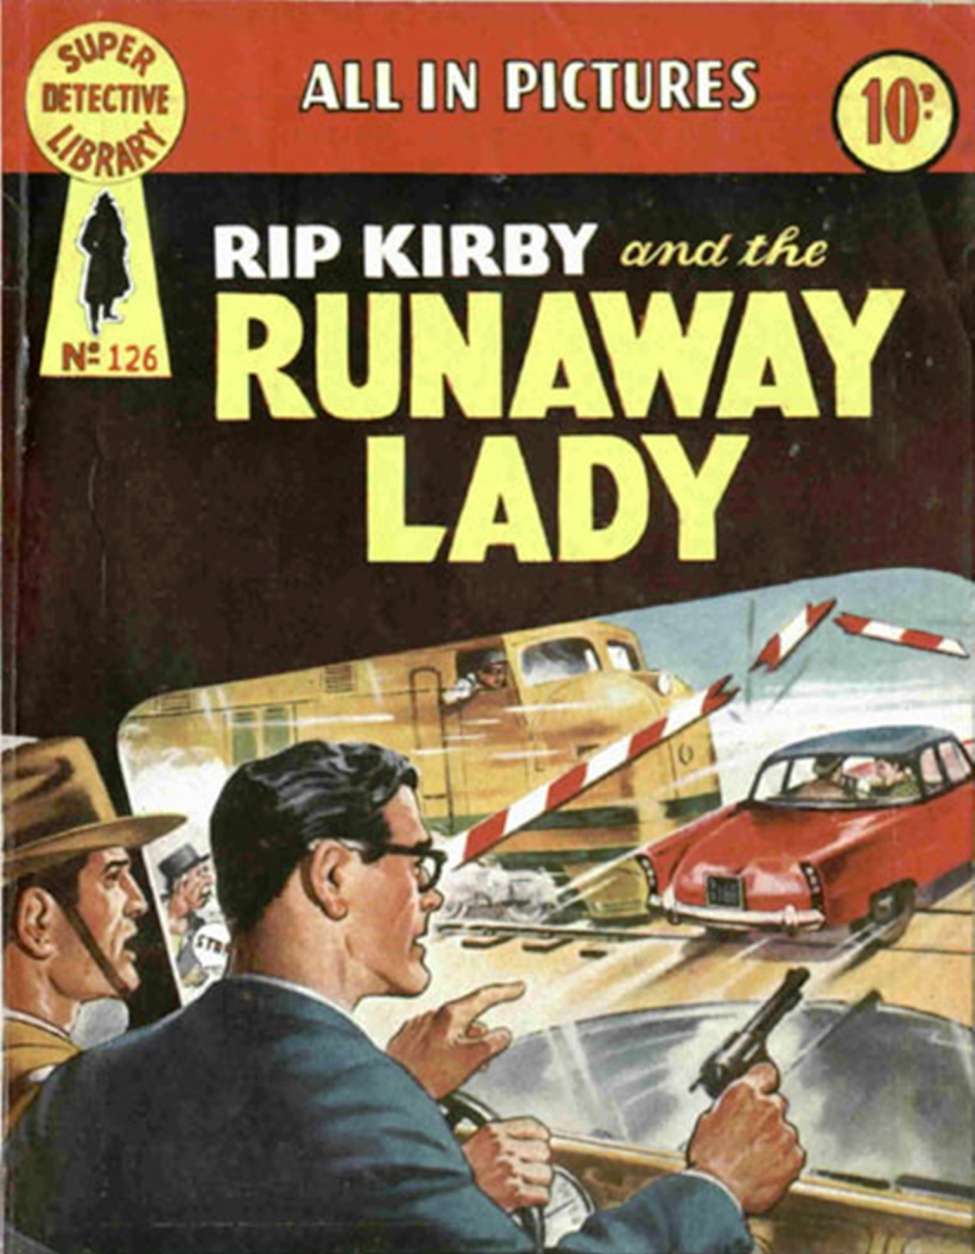 Book Cover For Super Detective Library 126 - Rip Kirby and The Runaway Lady